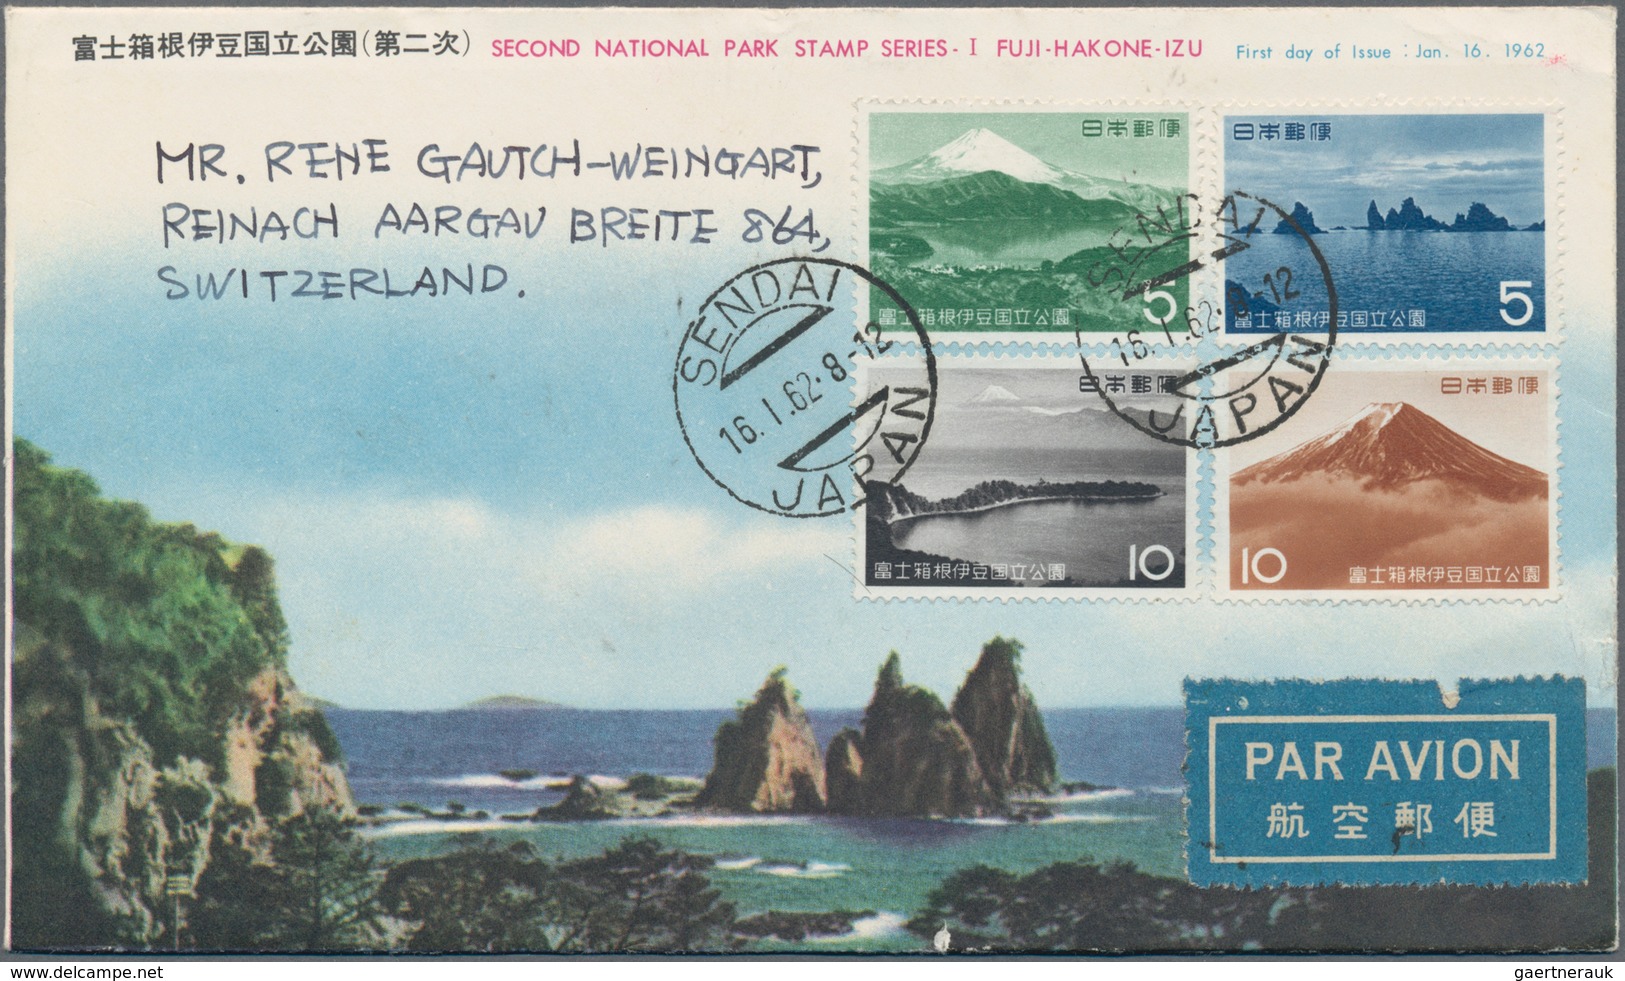 Japan: 1955/67 (ca.), FDC used to Switzerland (43) or unaddressed 12). Total 55 items, very clean co